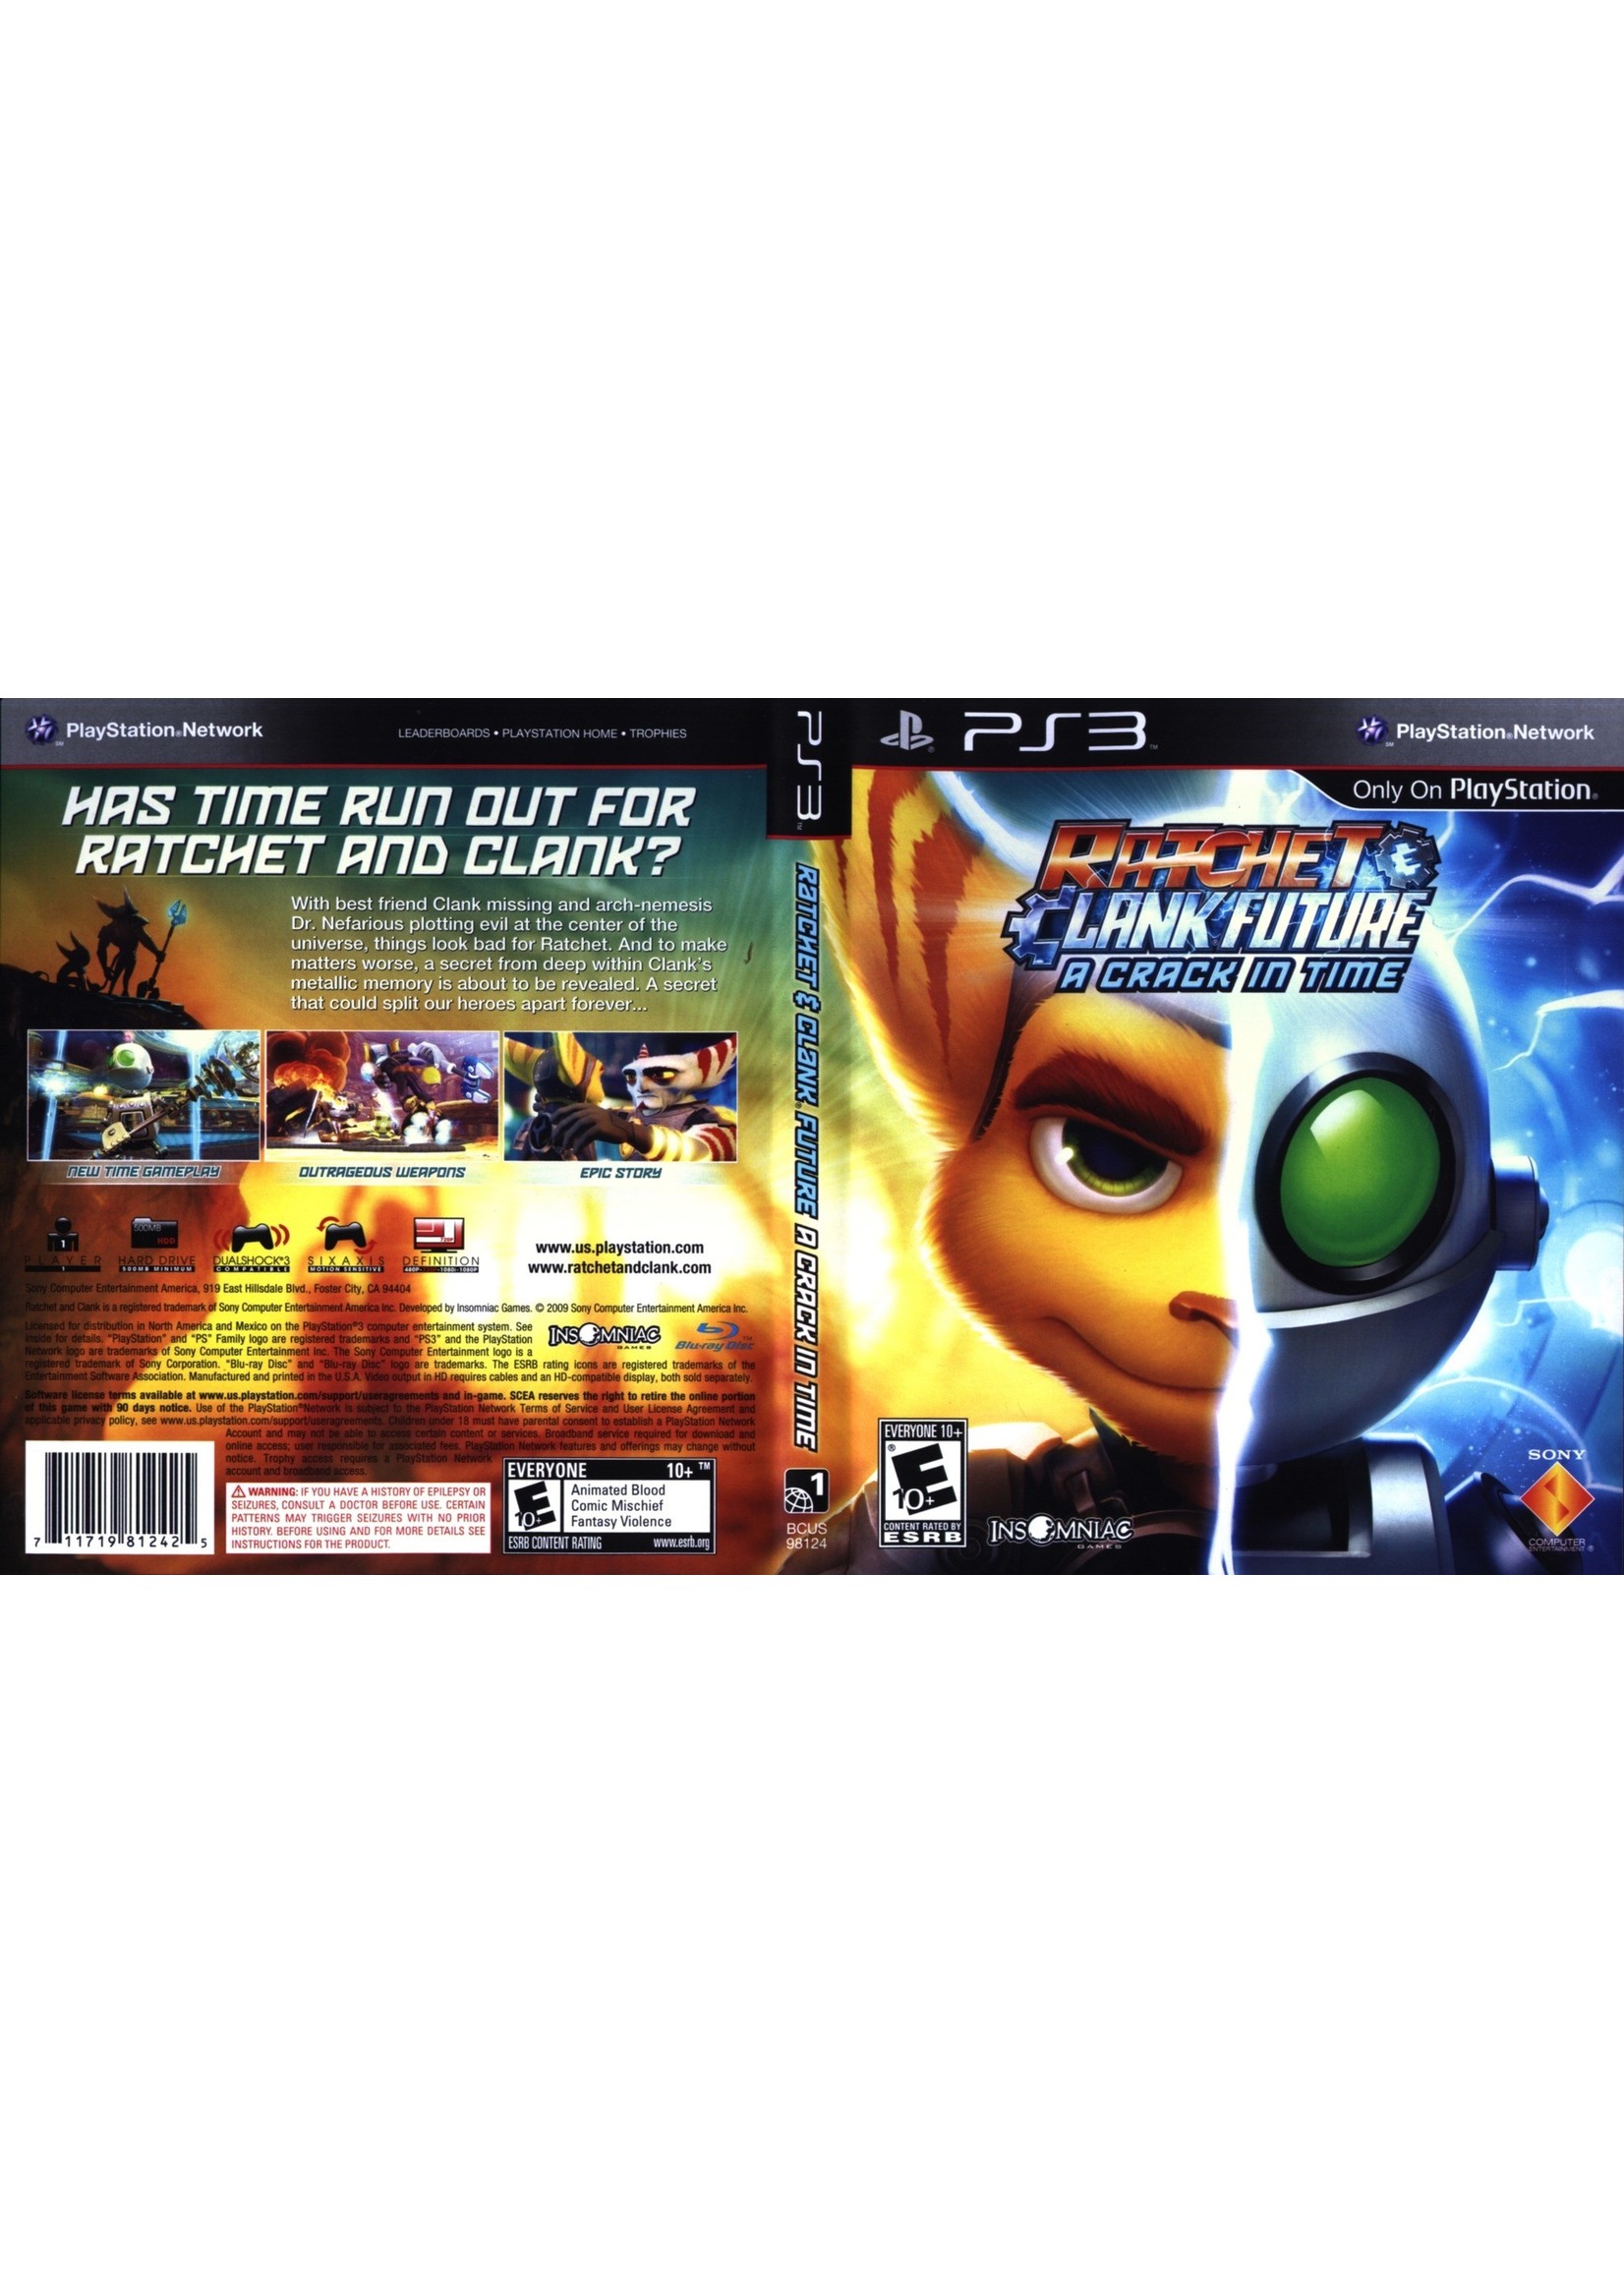 Sony Playstation 3 (PS3) Ratchet and Clank Future: A Crack in Time